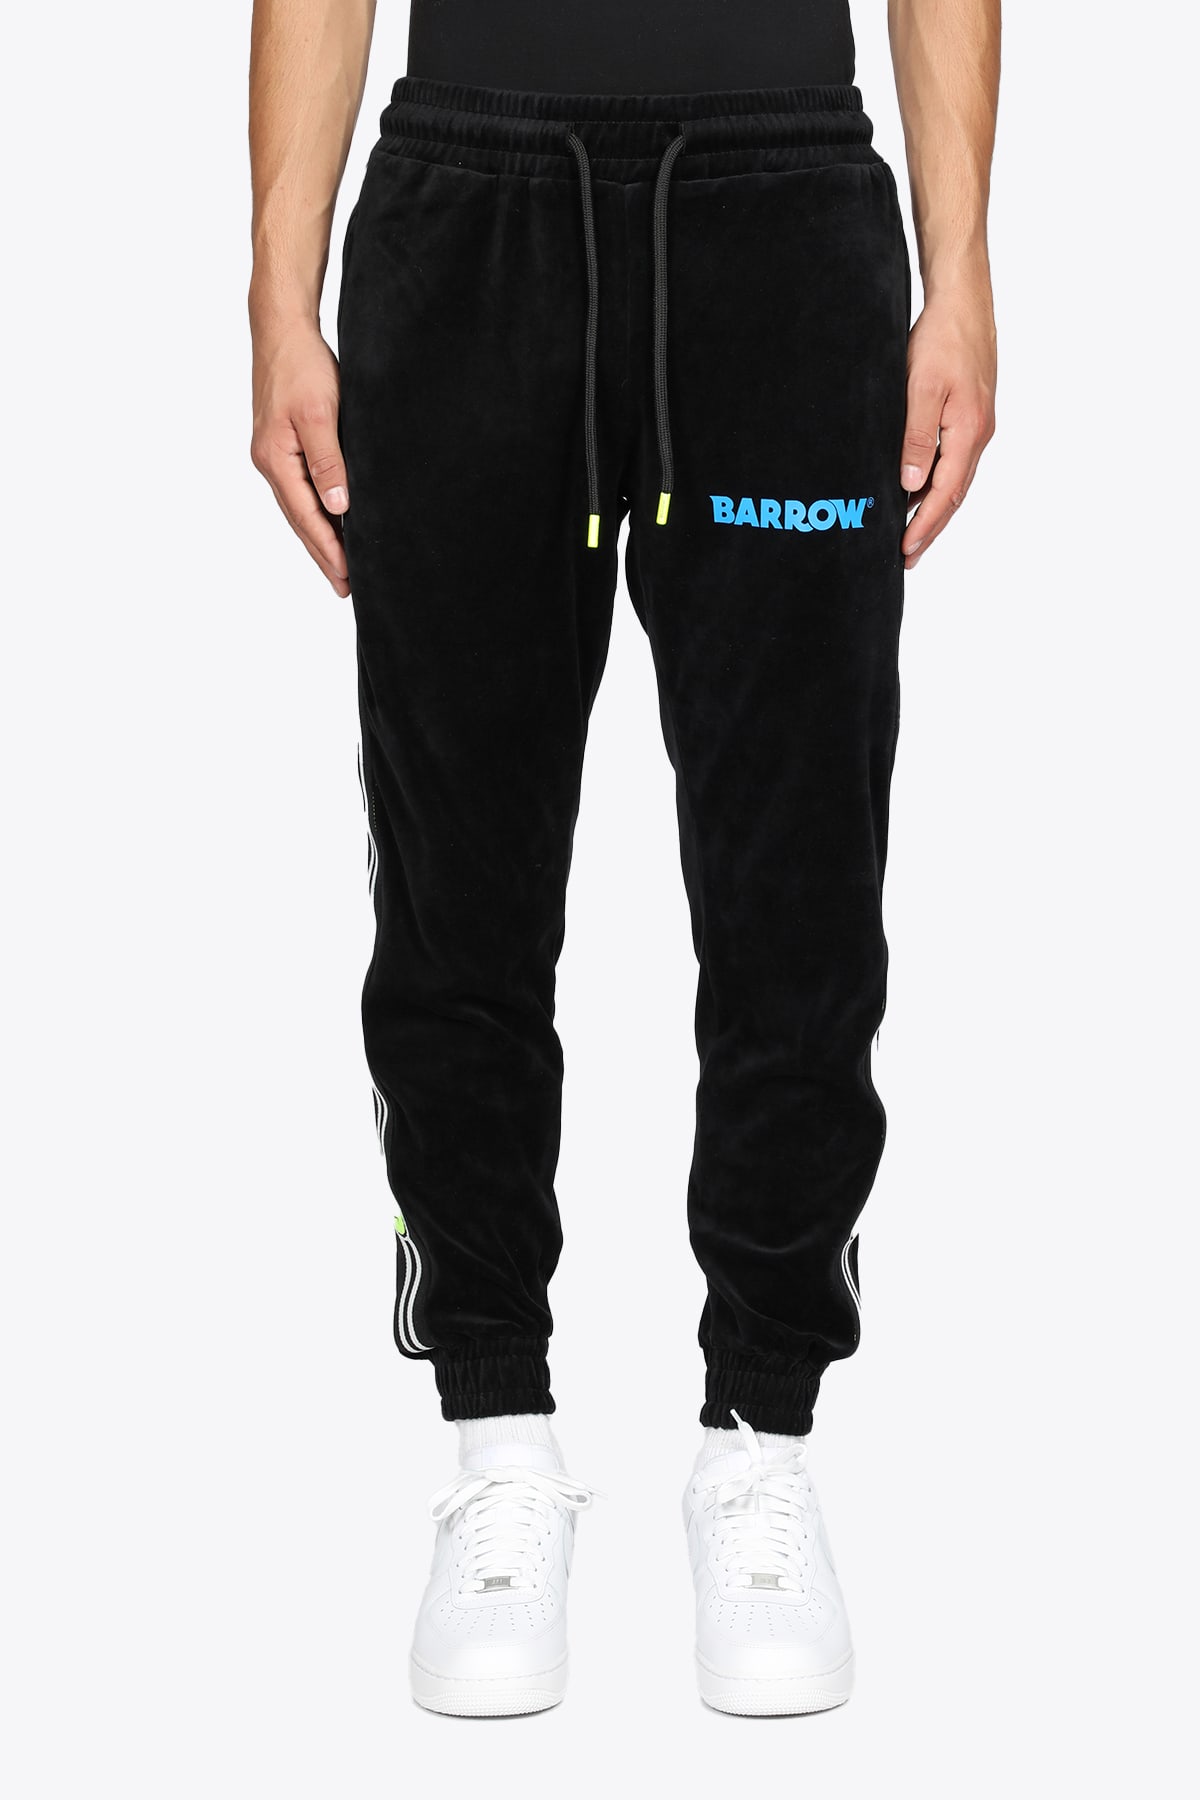 Barrow Terry Cloth Pants Black velour trackpant with smile patch